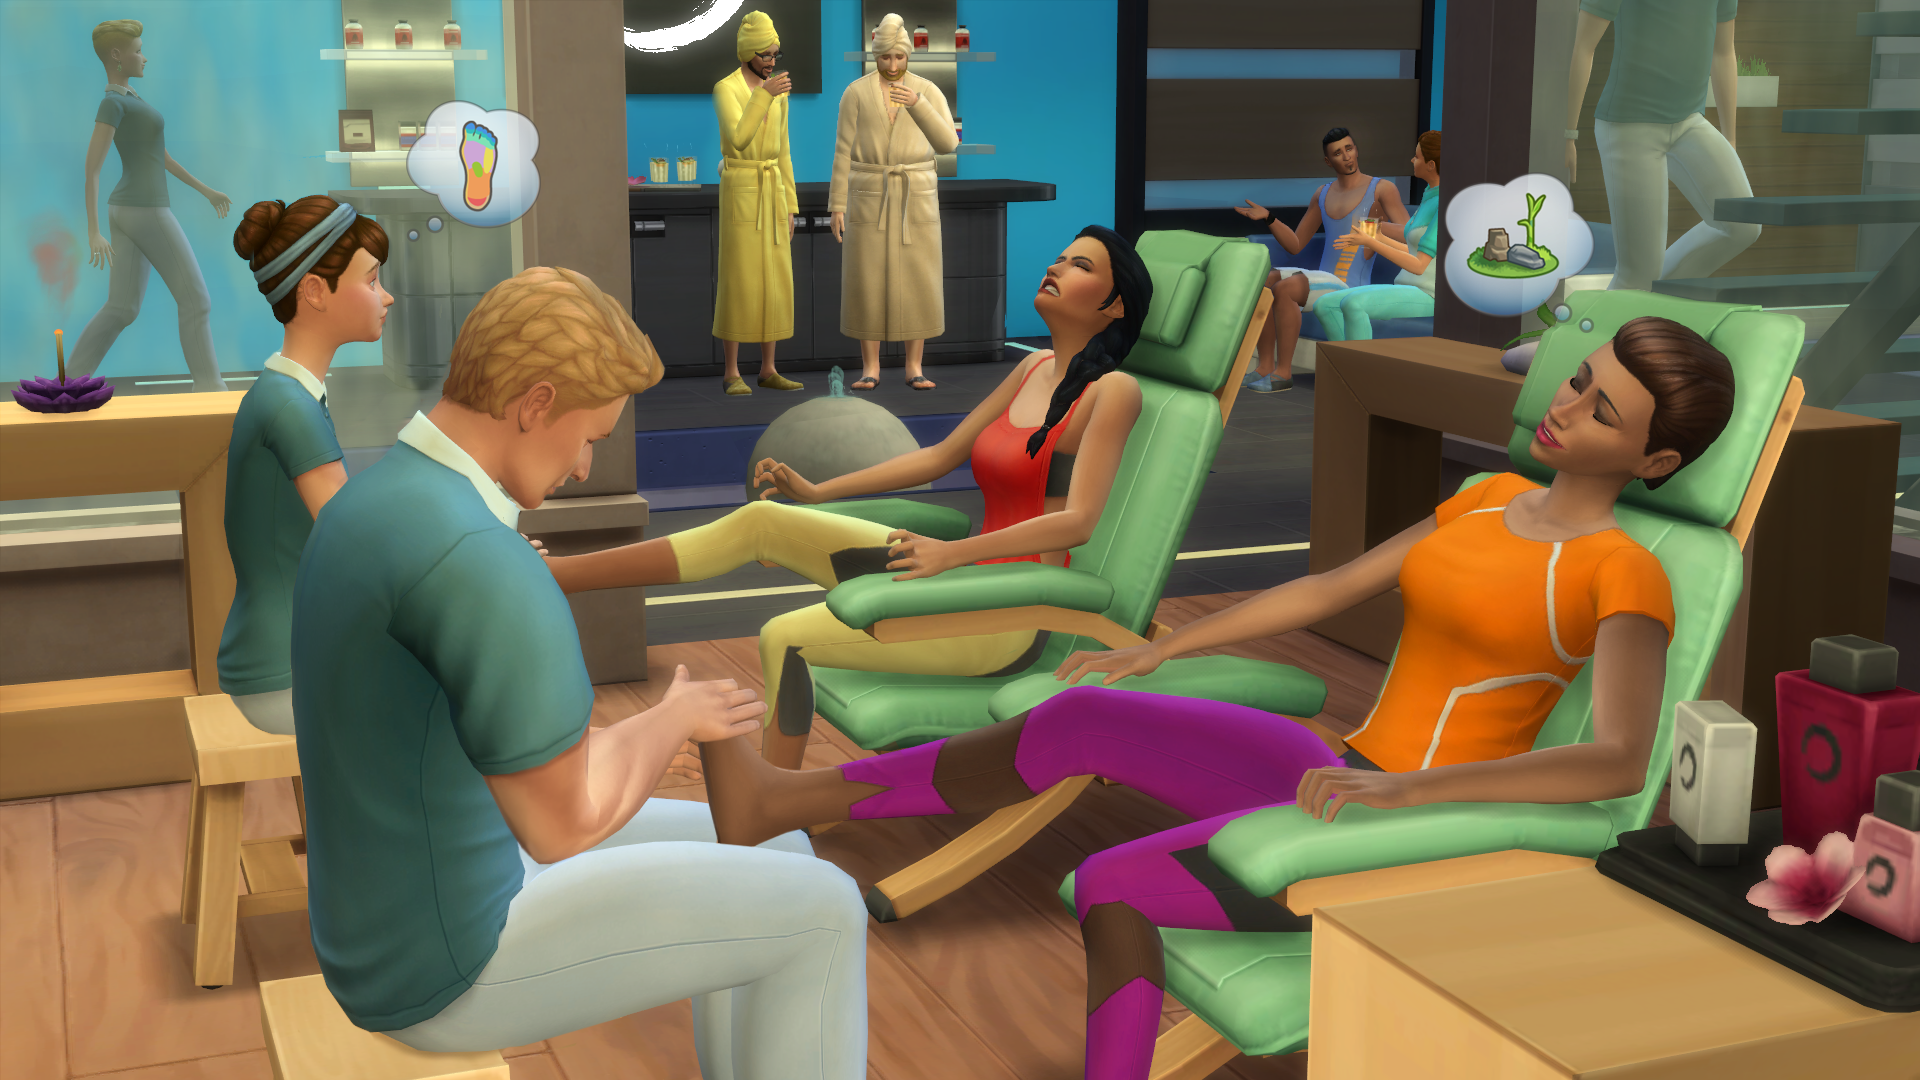 The sims 4 spa day free download mac 10 7 5